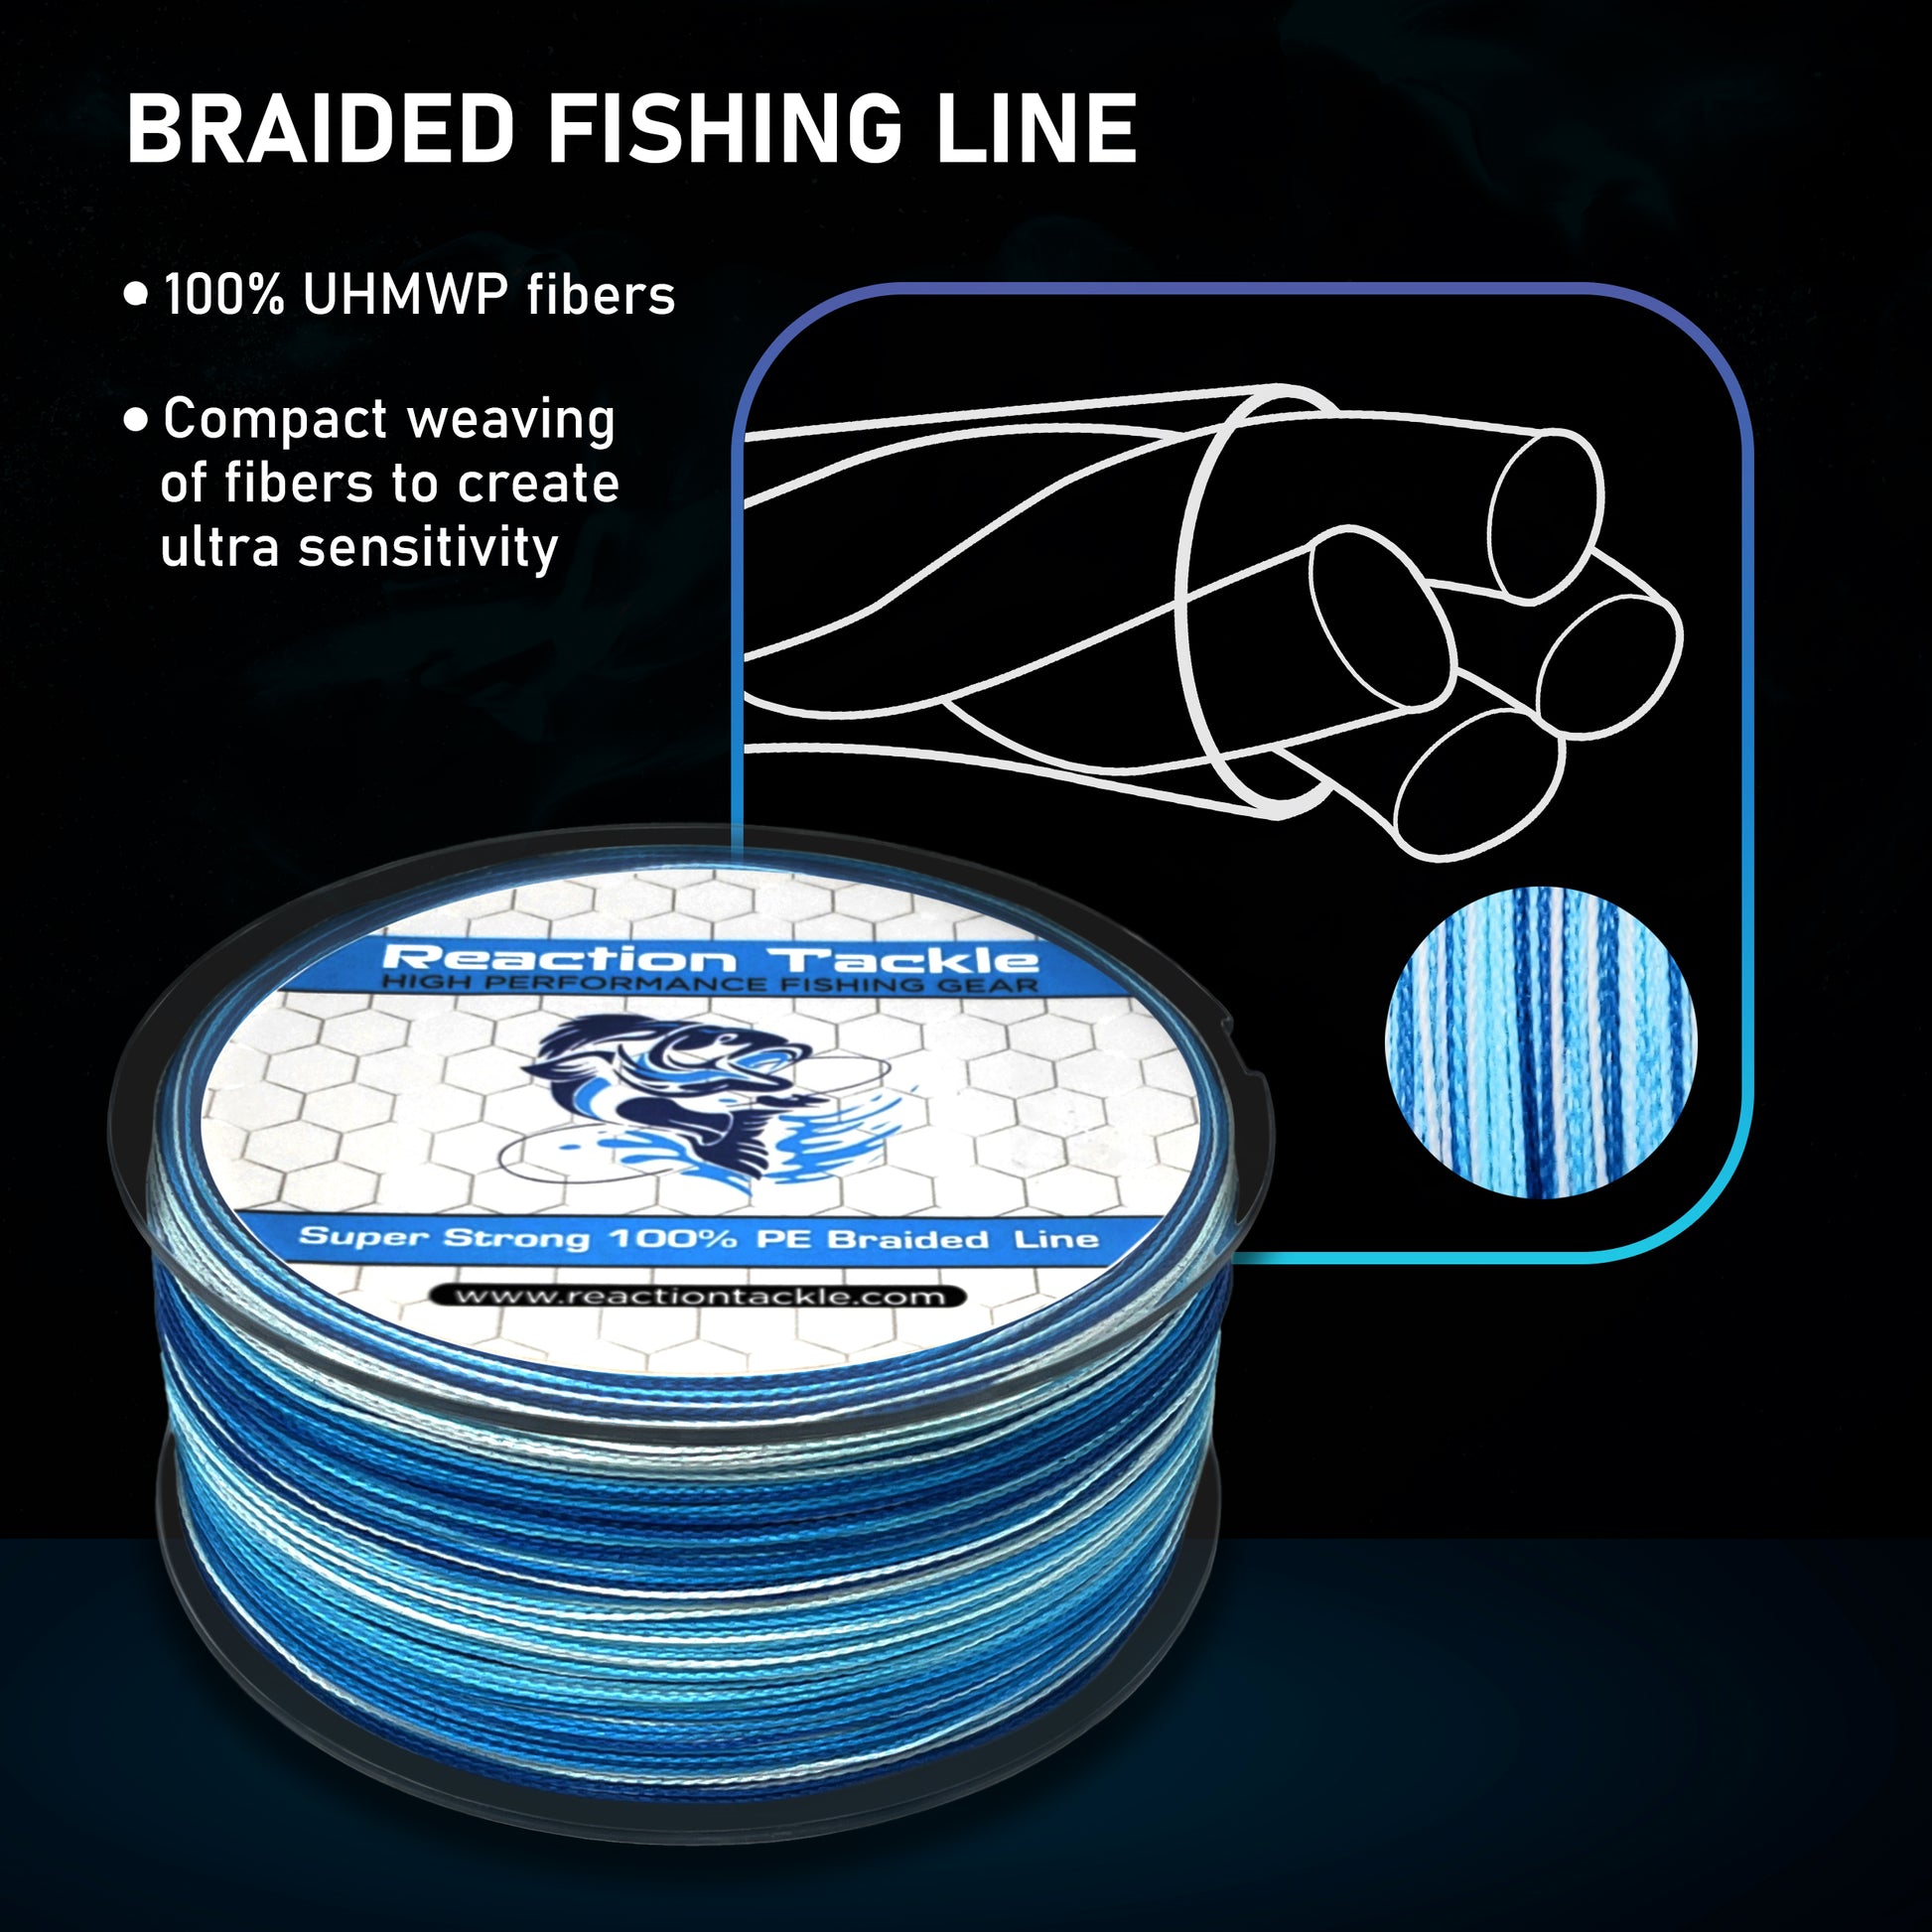 Underwater Visibility Test of Braided Fishing Lines 